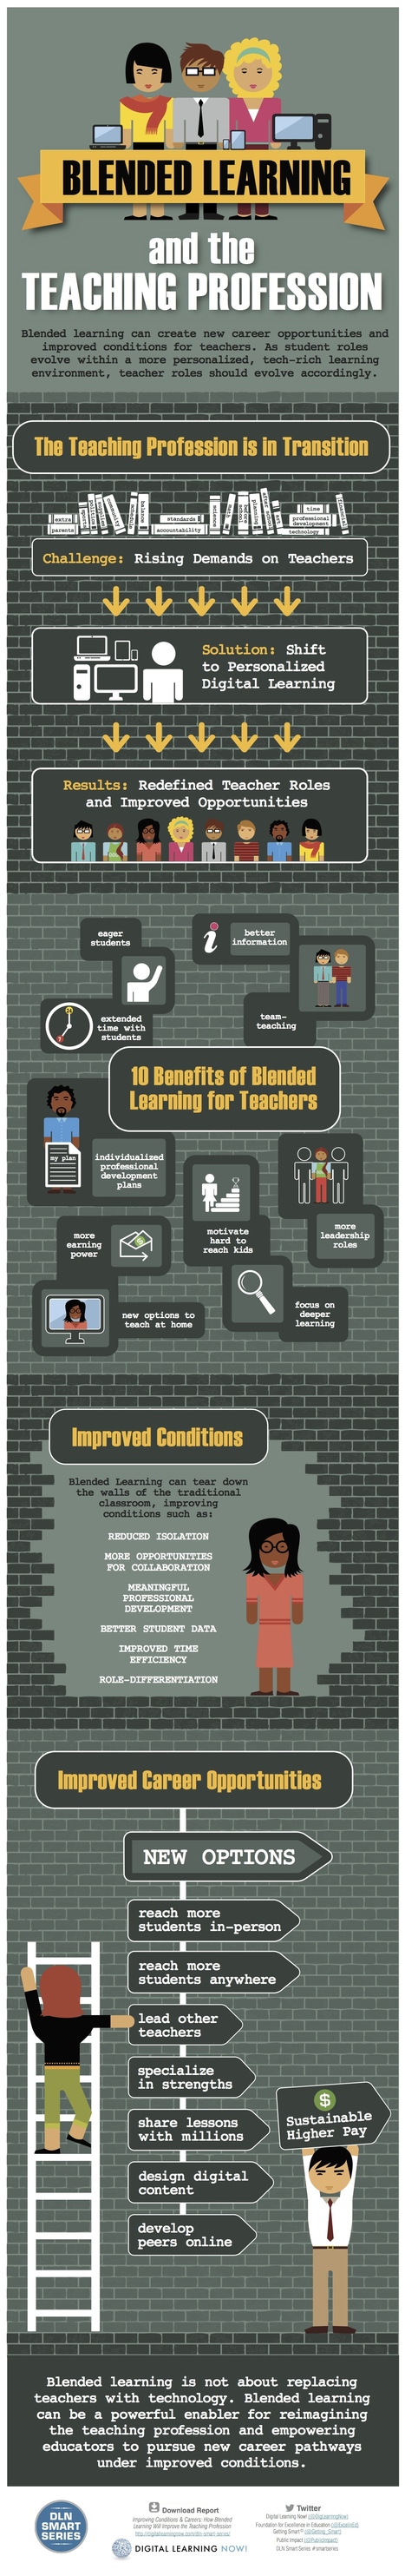 Blended Learning & The Teaching Profession - Infographic | Strictly pedagogical | Scoop.it